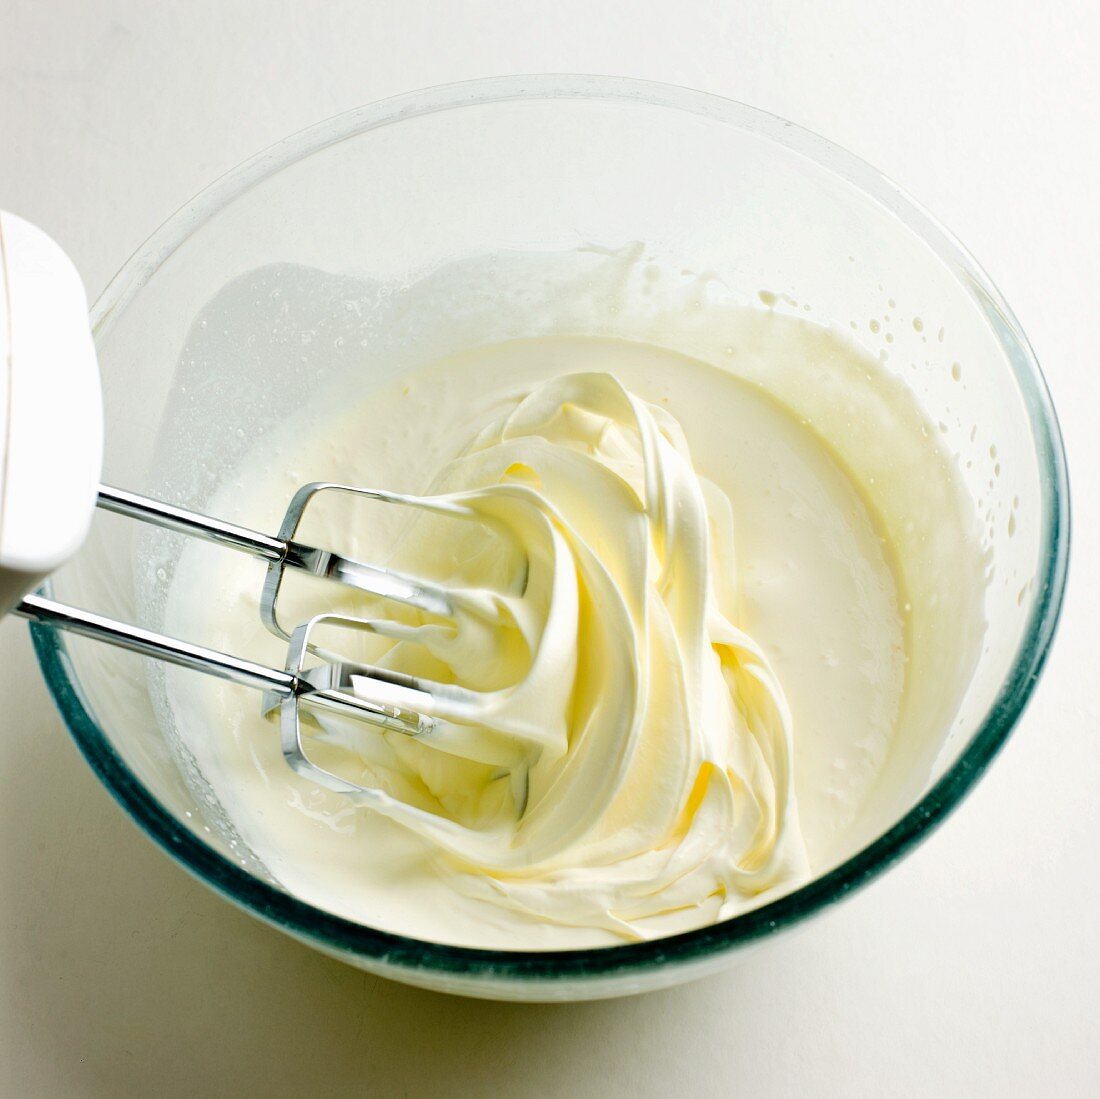 Cream being whipped in a glass bowl with an electric whisk